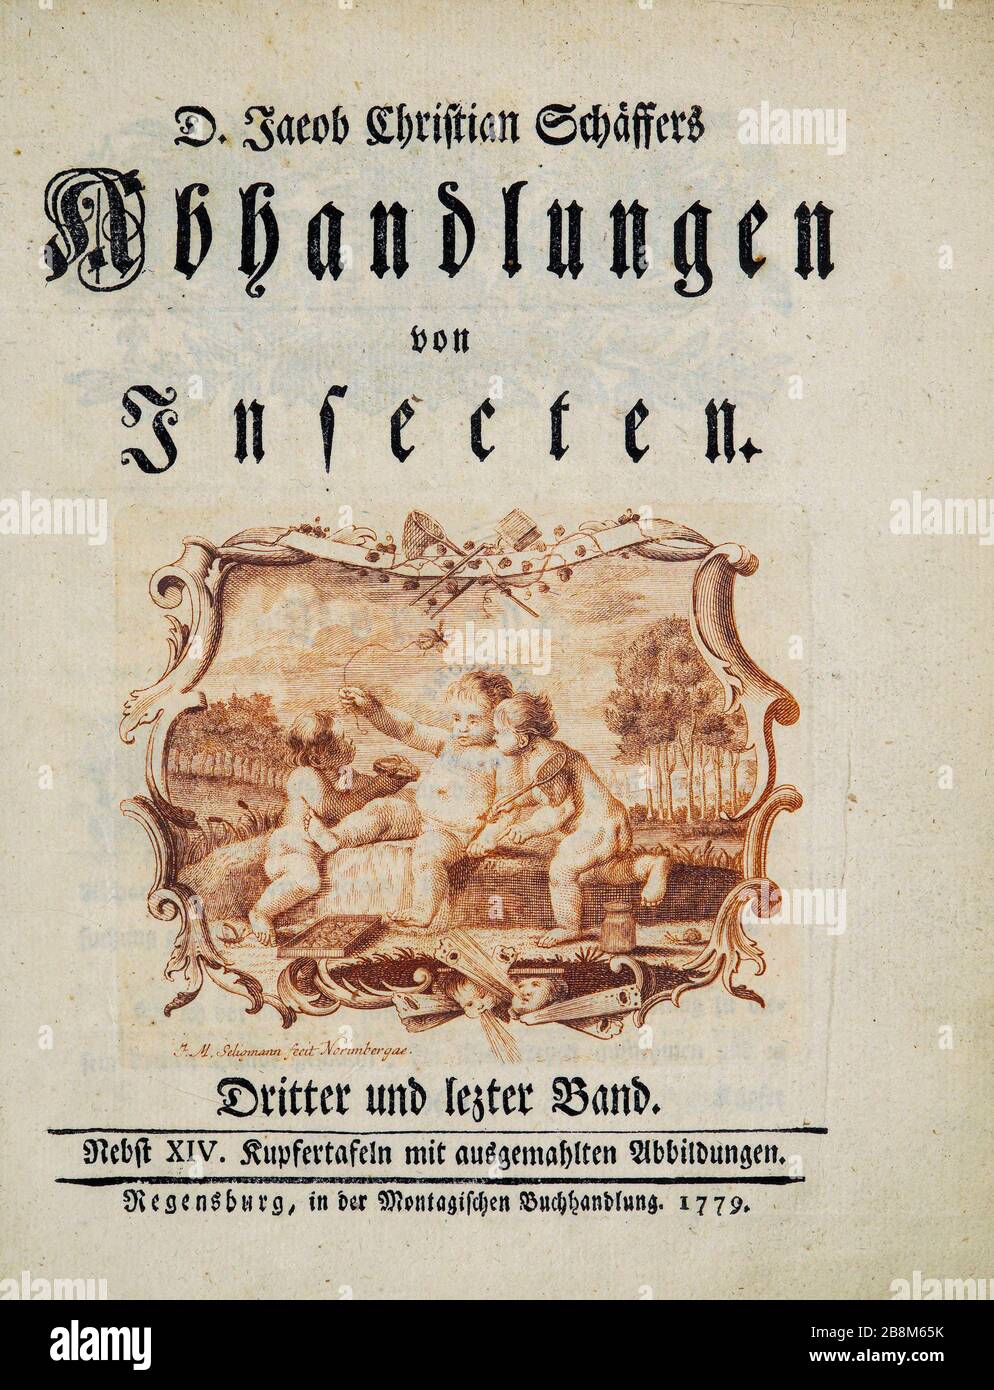 Title Page of an 18th century Entomology study from D. Jacob Christian Schaffers Abhandlungen von Insecten (Treatises on insects) published in 1764 by Schäffer, Jacob Christian, 1718-1790 Second addition Printed in Germany in 1797 Stock Photo